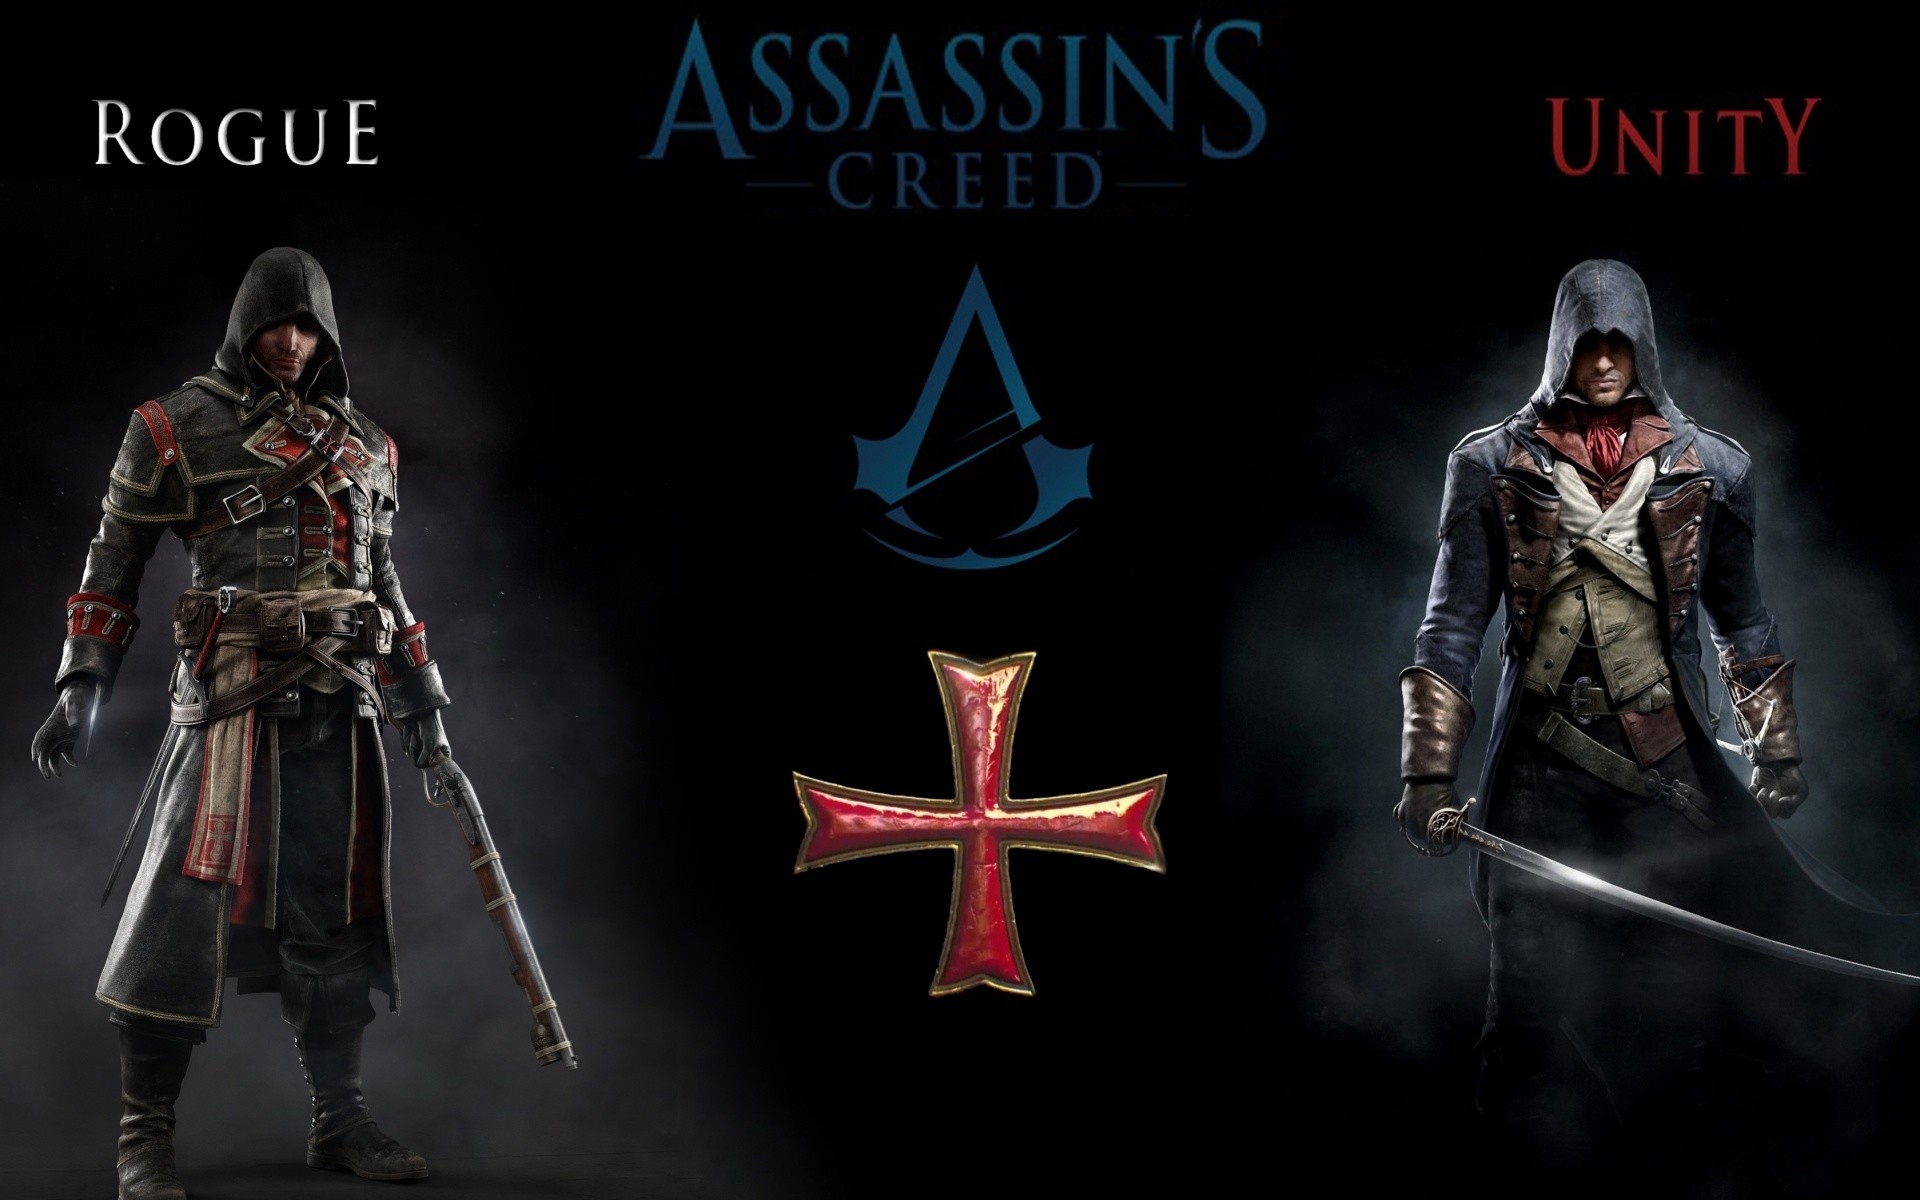 1920x1200 Wallpaper 1080p Assassin's Creed Unity Rogue Video Game HD.